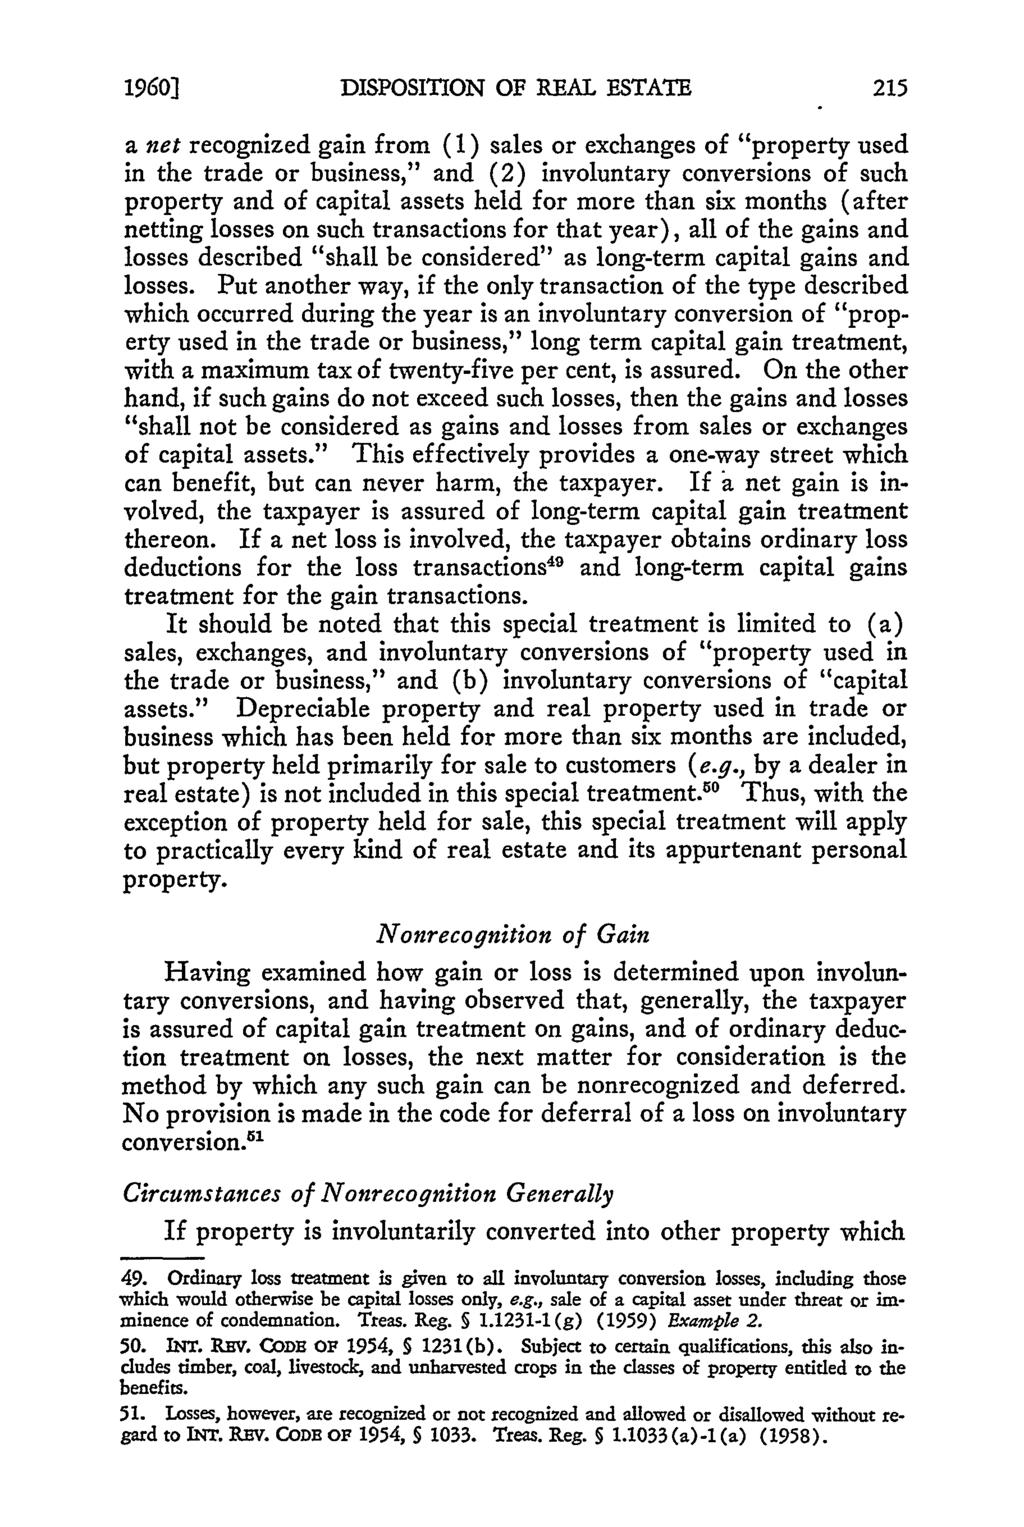 1960] DISPOSITION OF REAL ESTATE a net recognized gain from (1) sales or exchanges of "property used in the trade or business," and (2) involuntary conversions of such property and of capital assets